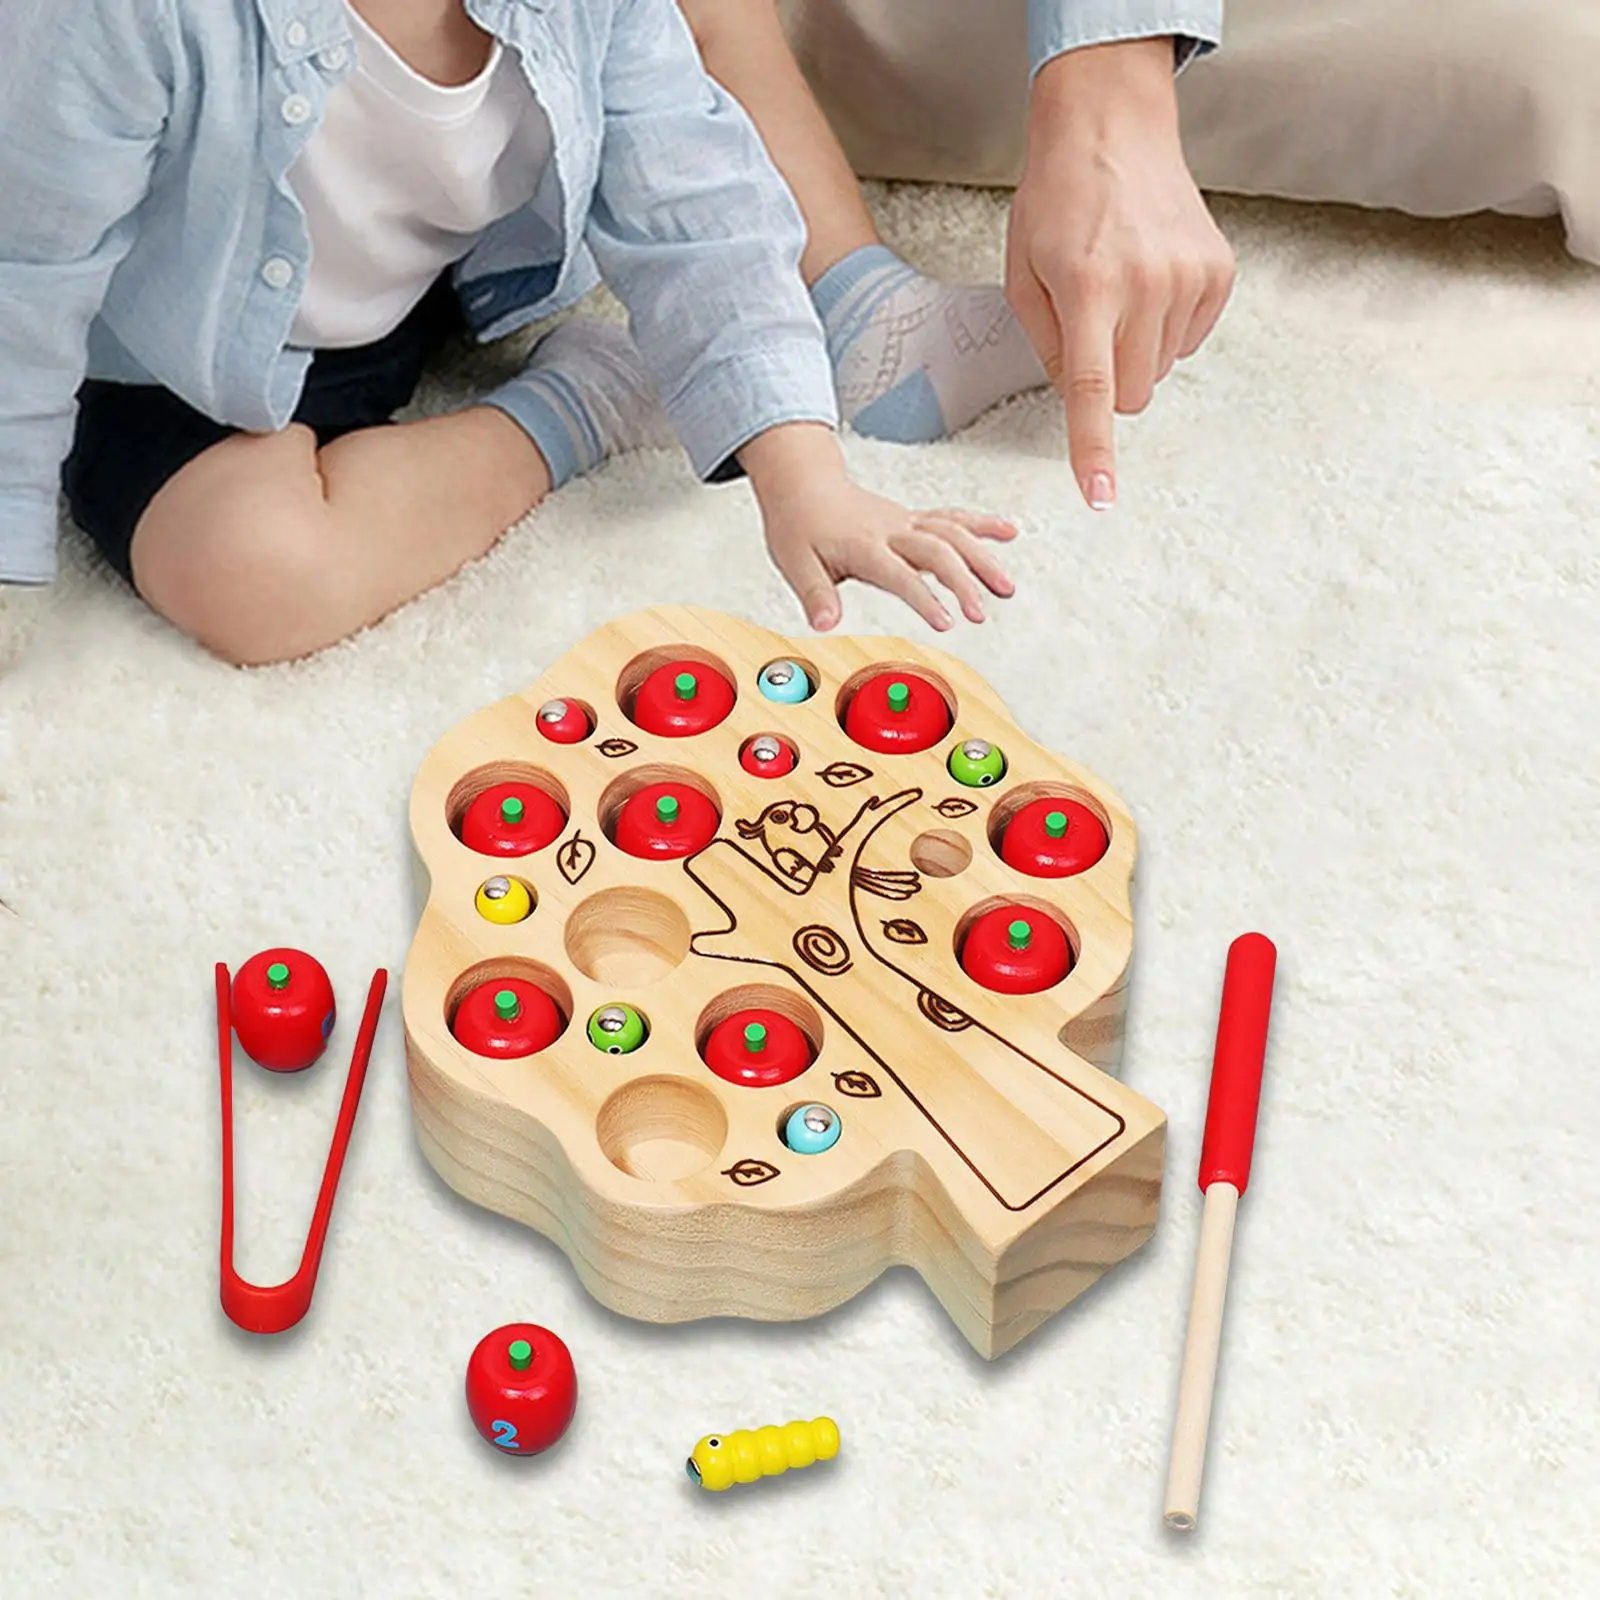 Wood Montessori Educational Toys Catching Worm Fine Motor Skill Toy Preschool Training Counting Wooden Game Toy for Boys Girls